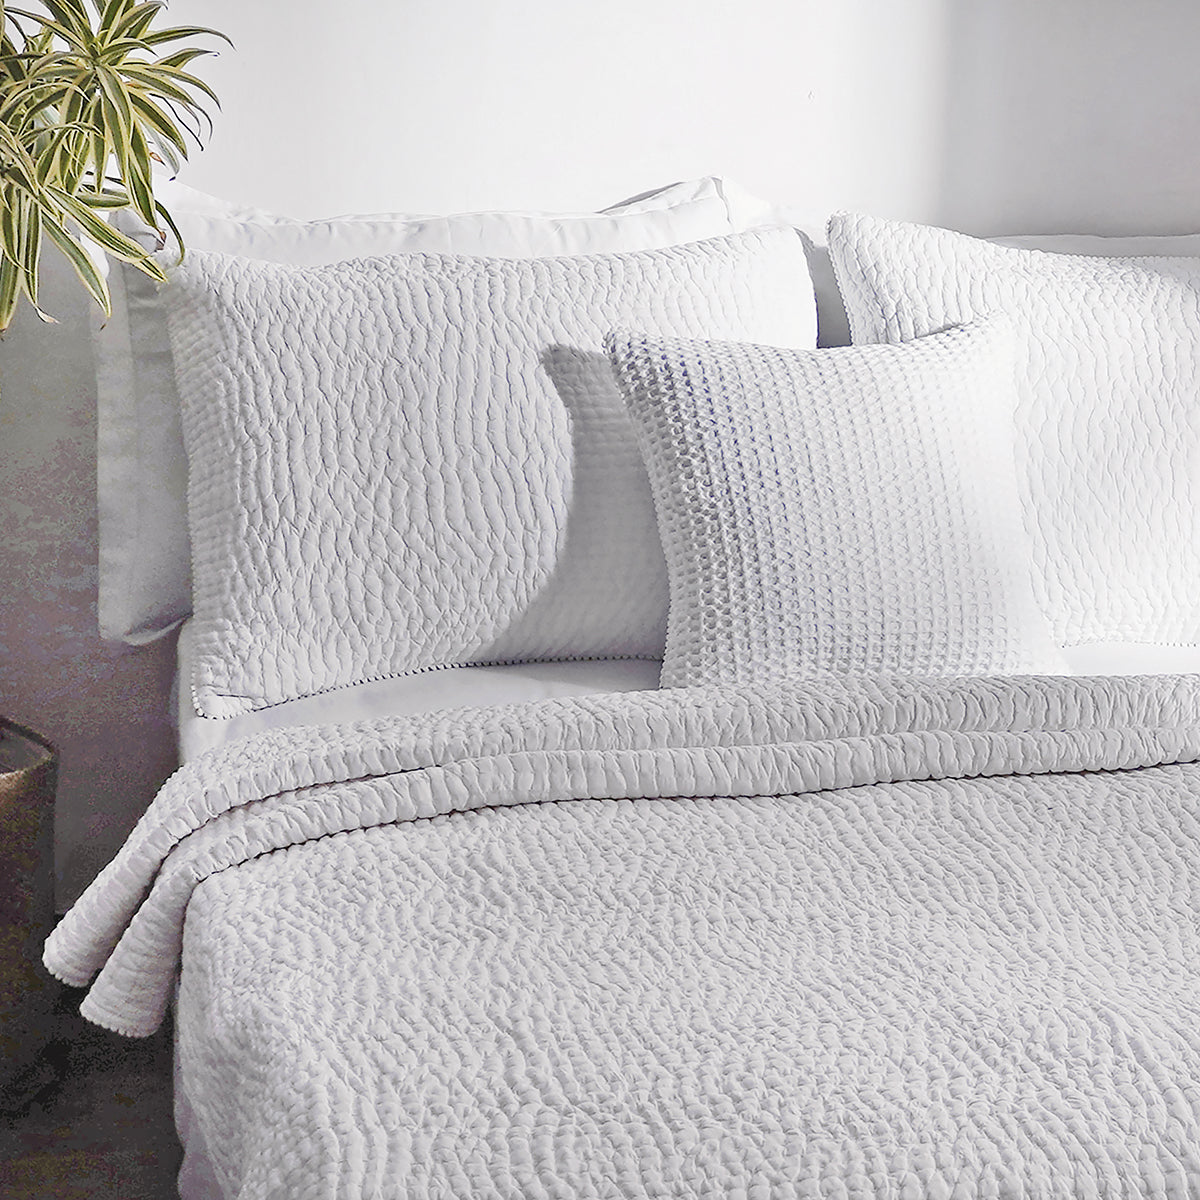 SHWET - White Quilt with coordinated Pillow covers, kantha bedding, Stripe quilting, 100% cotton